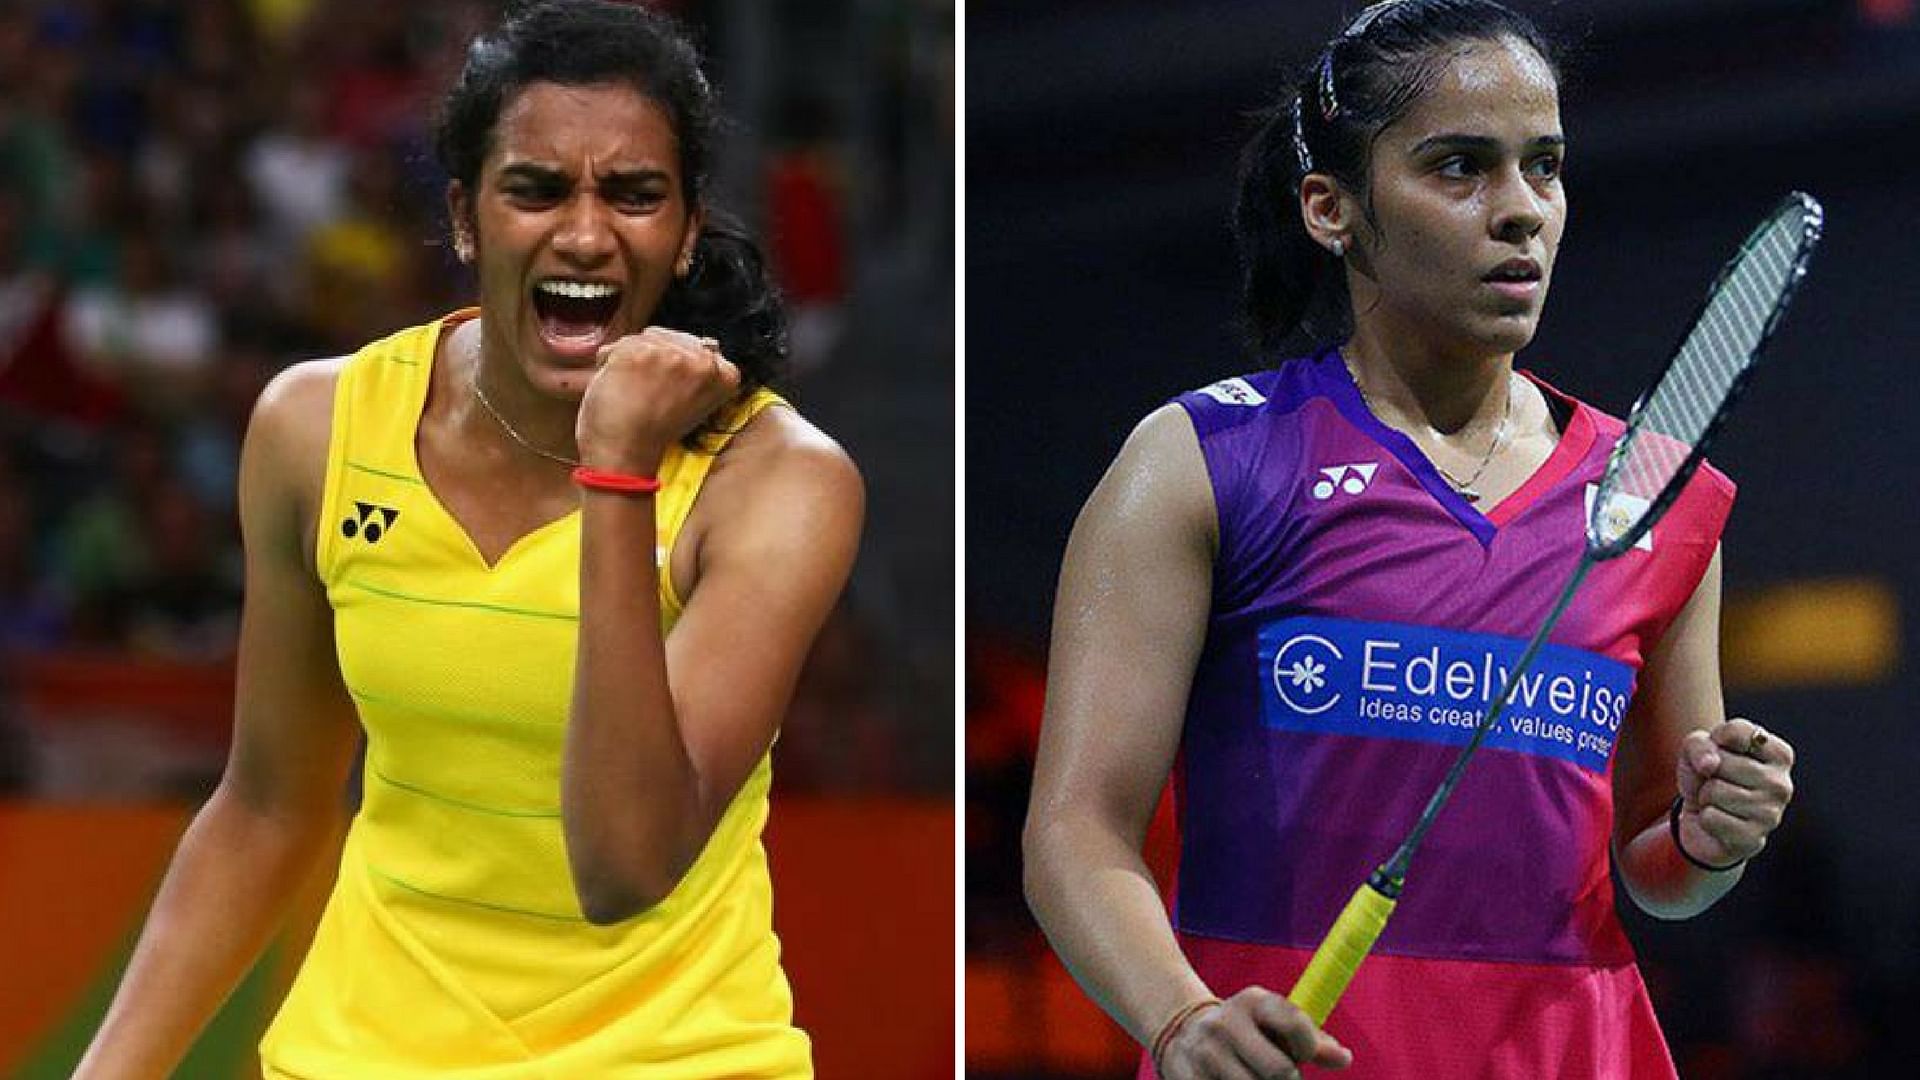 Saina and Sindhu will both be seen in action on Friday at the Badminton World Championship